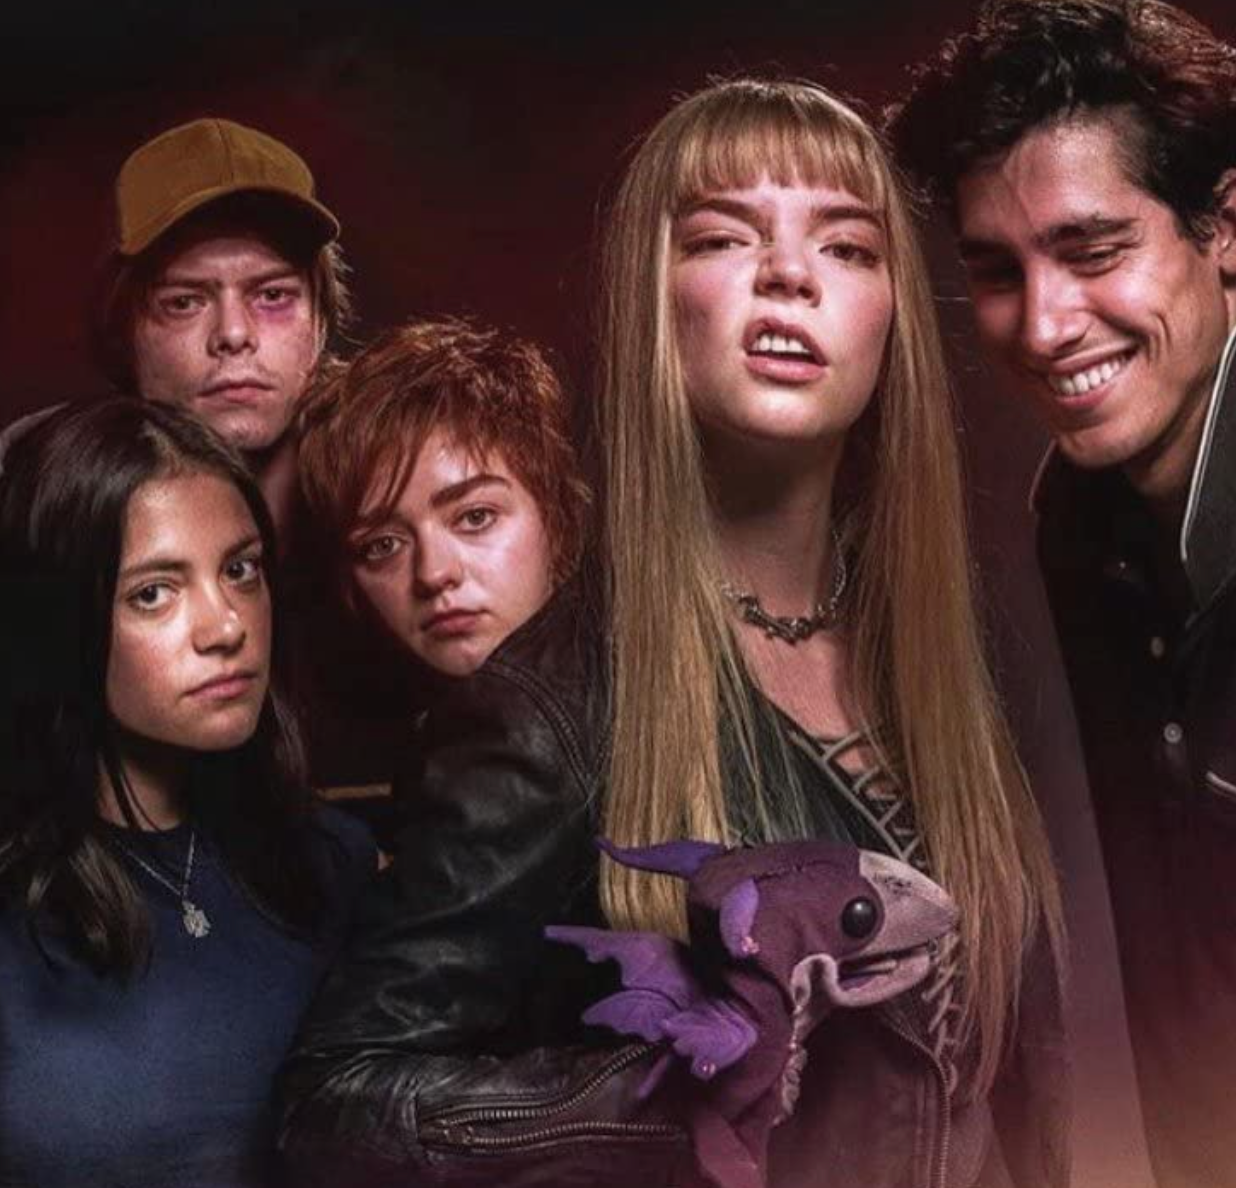 The New Mutants is getting destroyed by critics on Rotten Tomatoes